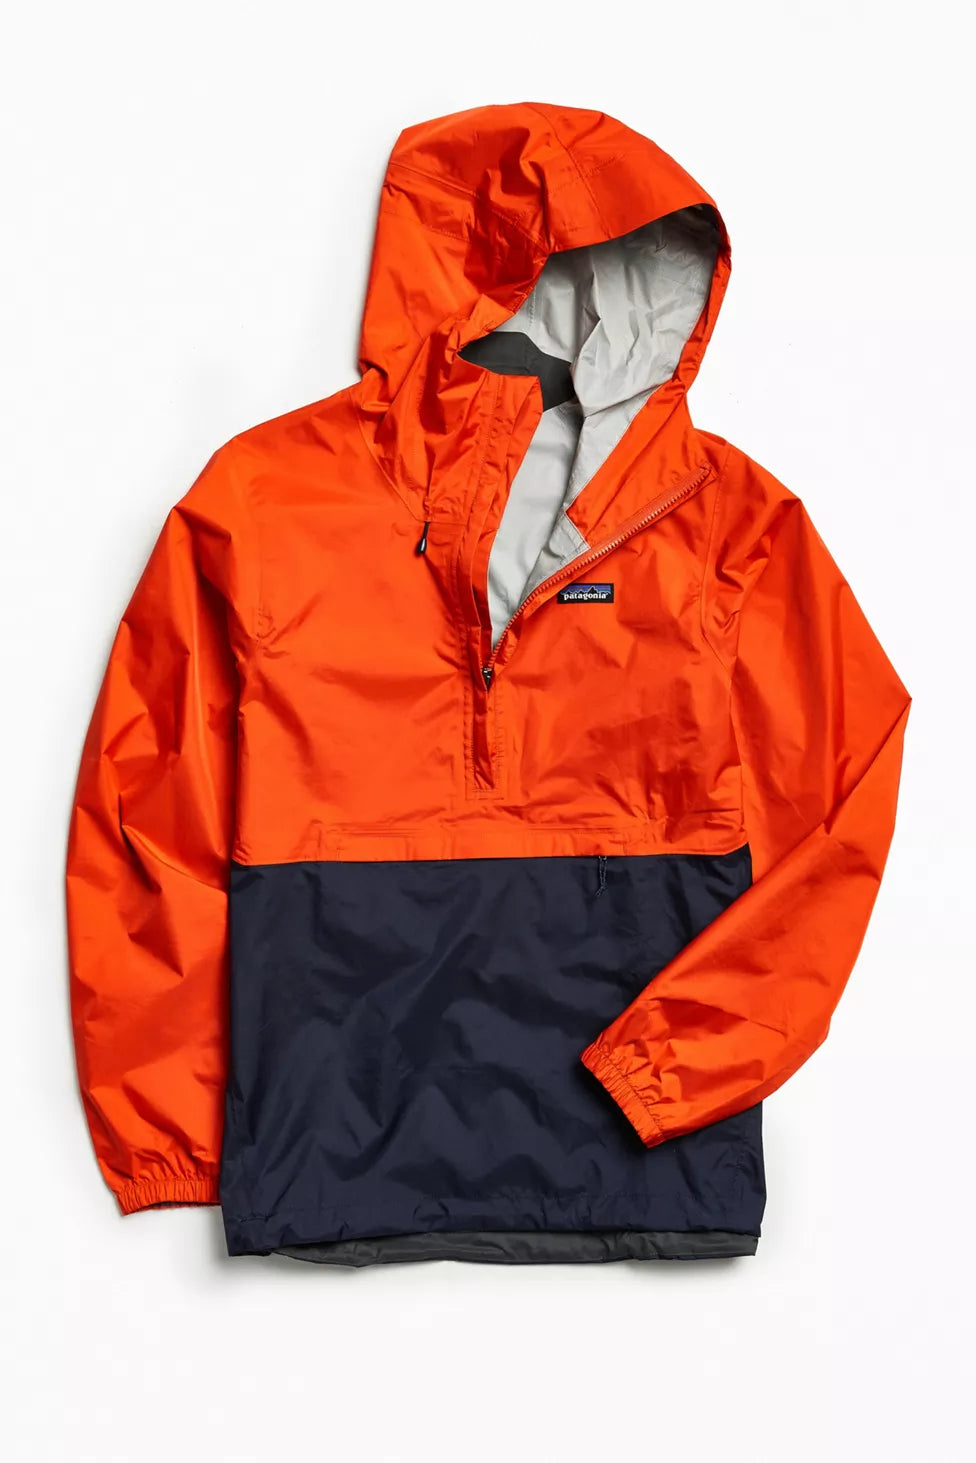 Patagonia - PATAGONIA TORRENTSHELL PULLOVER ANORAK JACKET - Rent With Thred